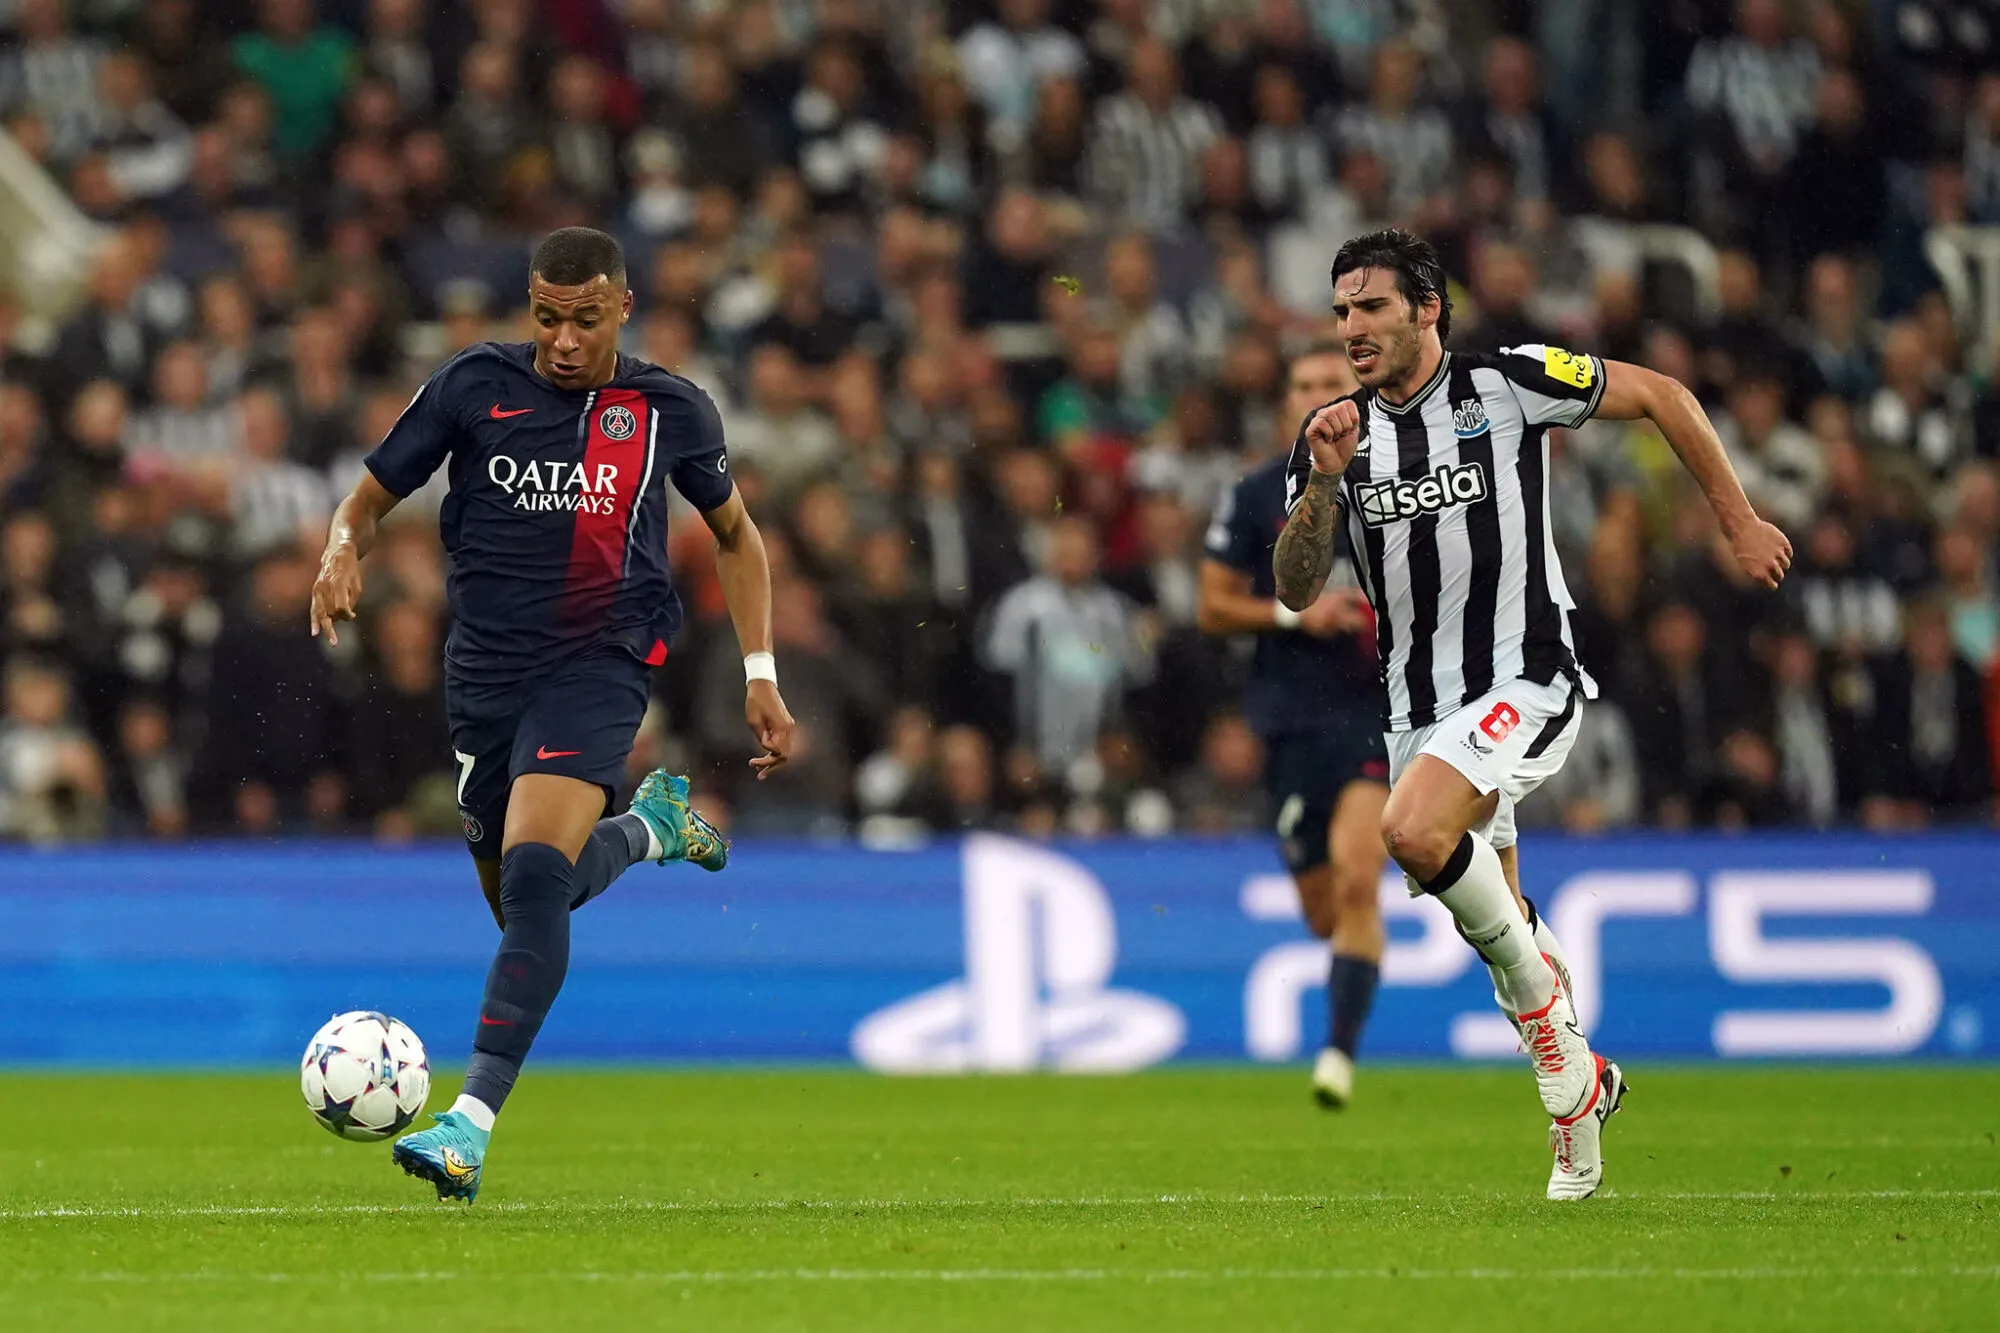 Paris Saint-Germain's Kylian Mbappe gets away from Newcastle United's Sandro Tonali during the UEFA Champions League Group F match at St. James' Park, Newcastle upon Tyne. Picture date: Wednesday October 4, 2023. - Photo by Icon sport